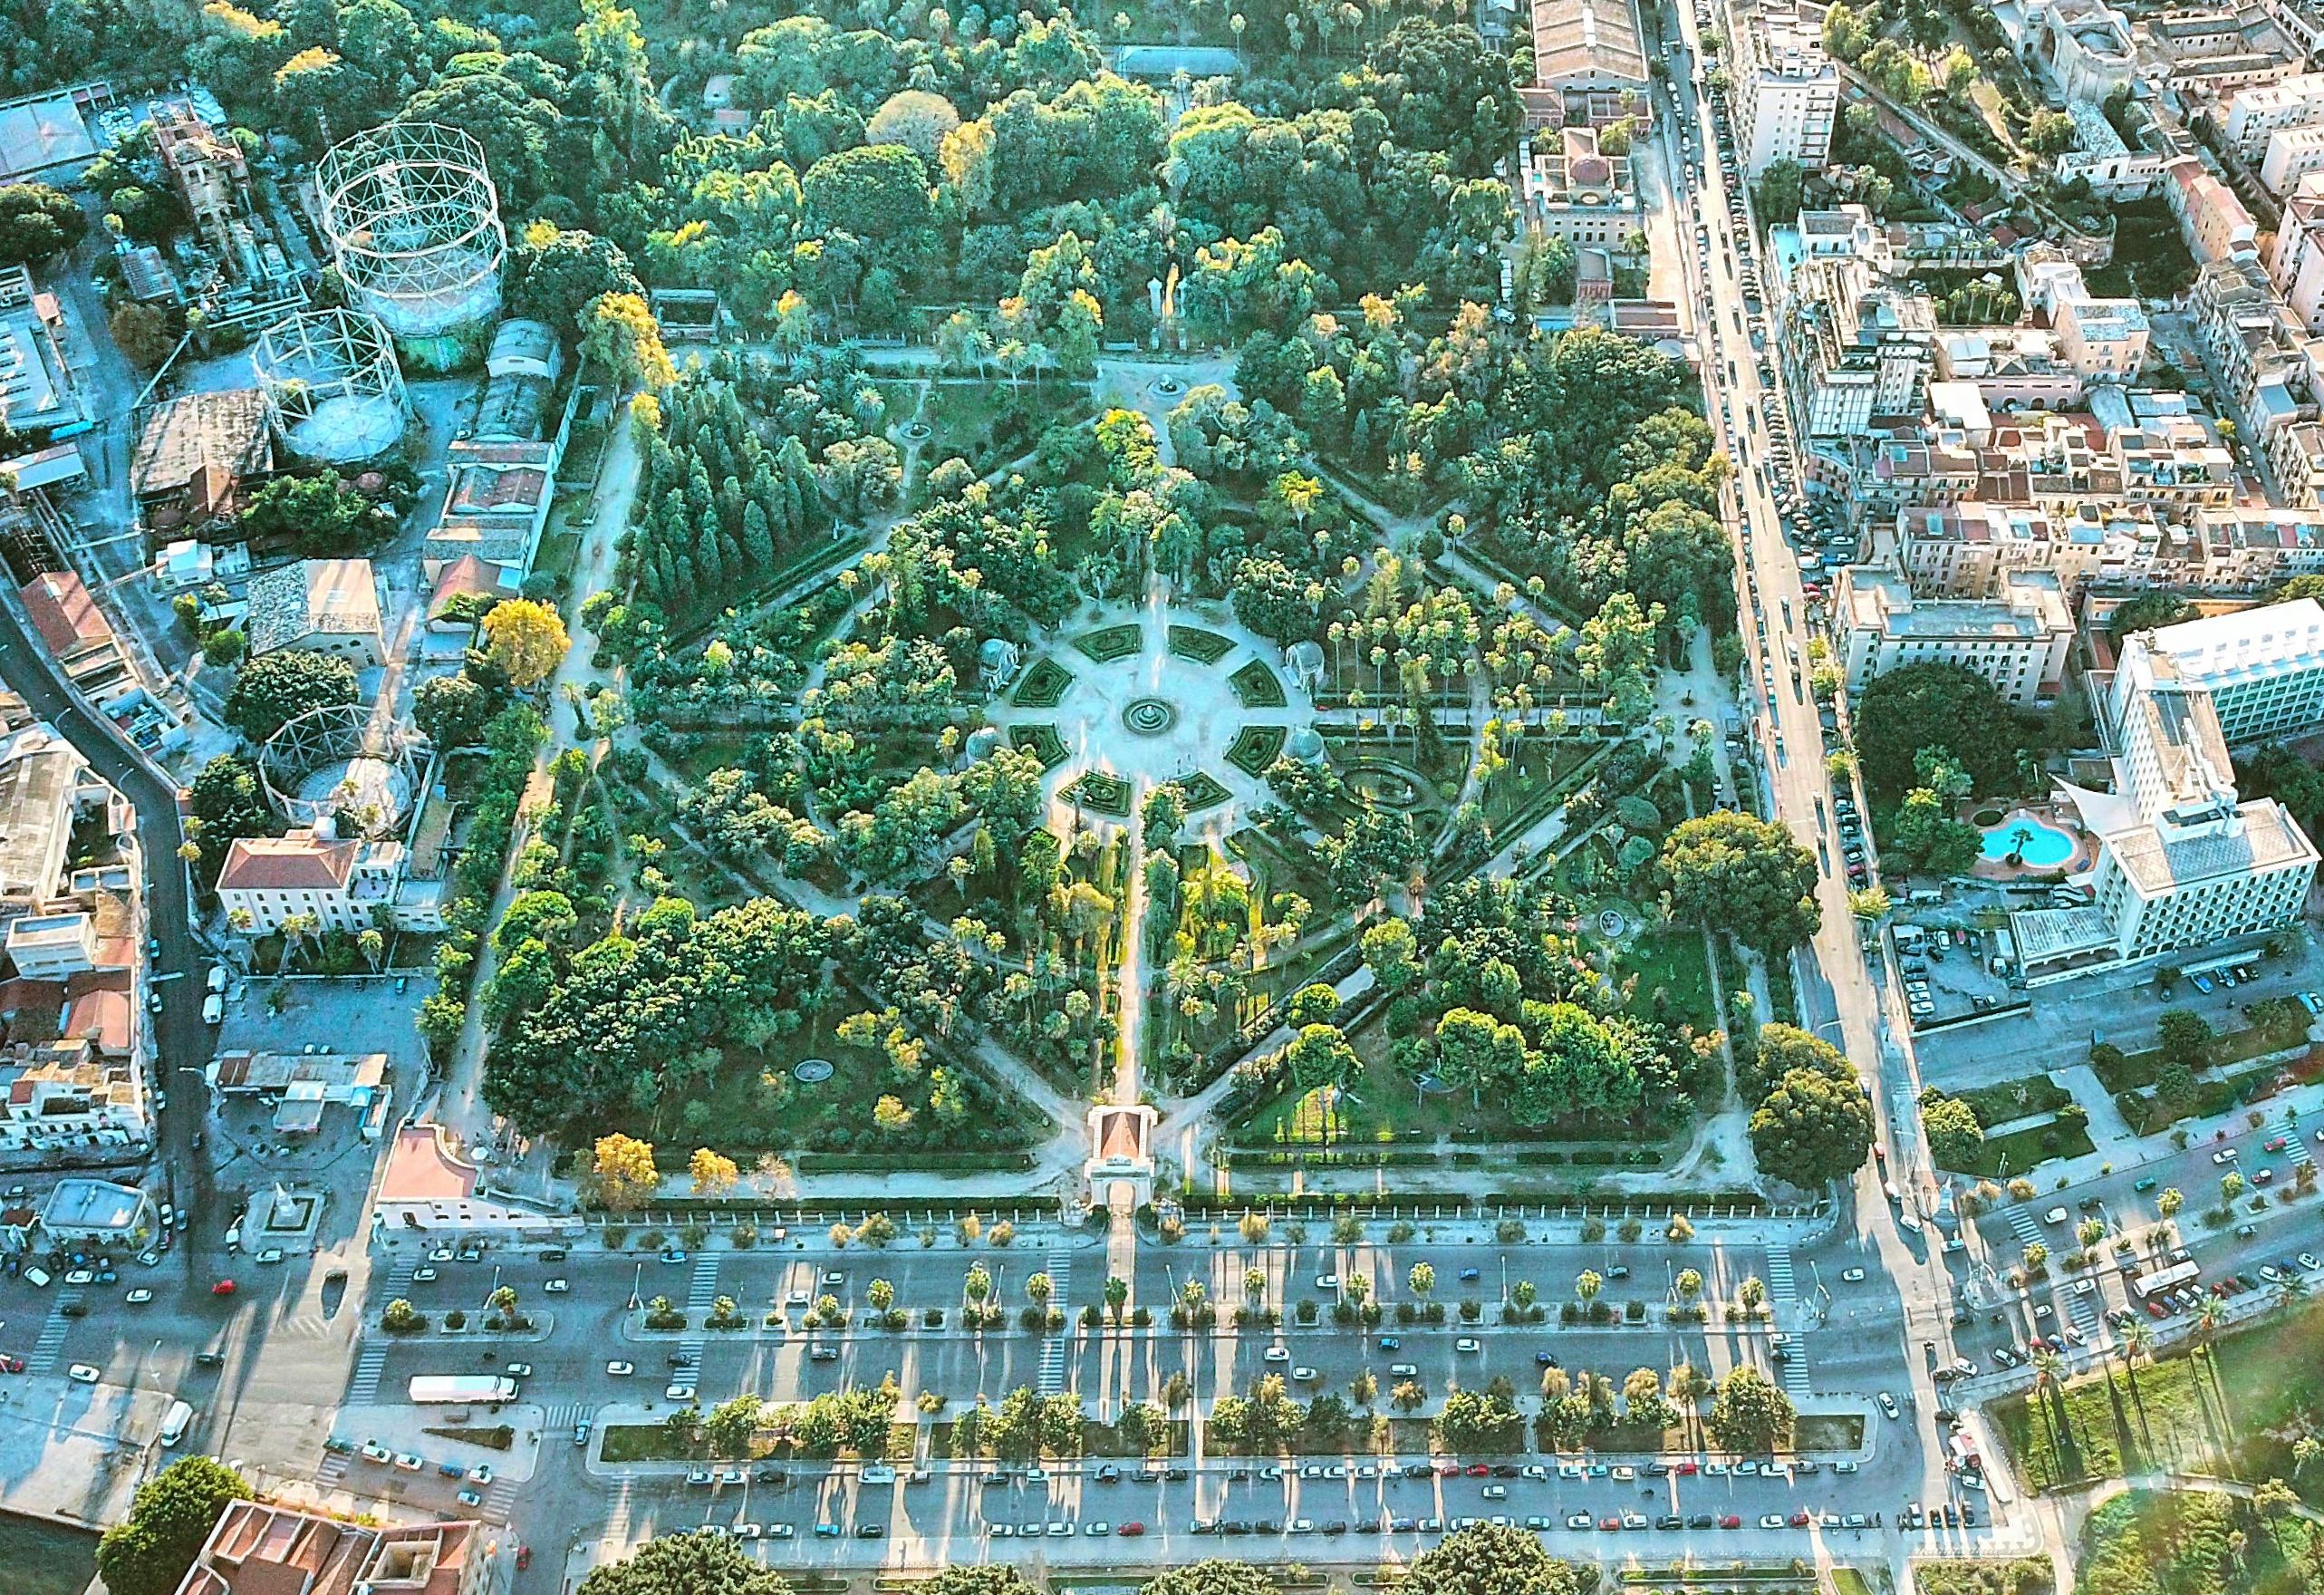 Incredible Birds-Eye View Photography of the City From Jeffrey Milstein